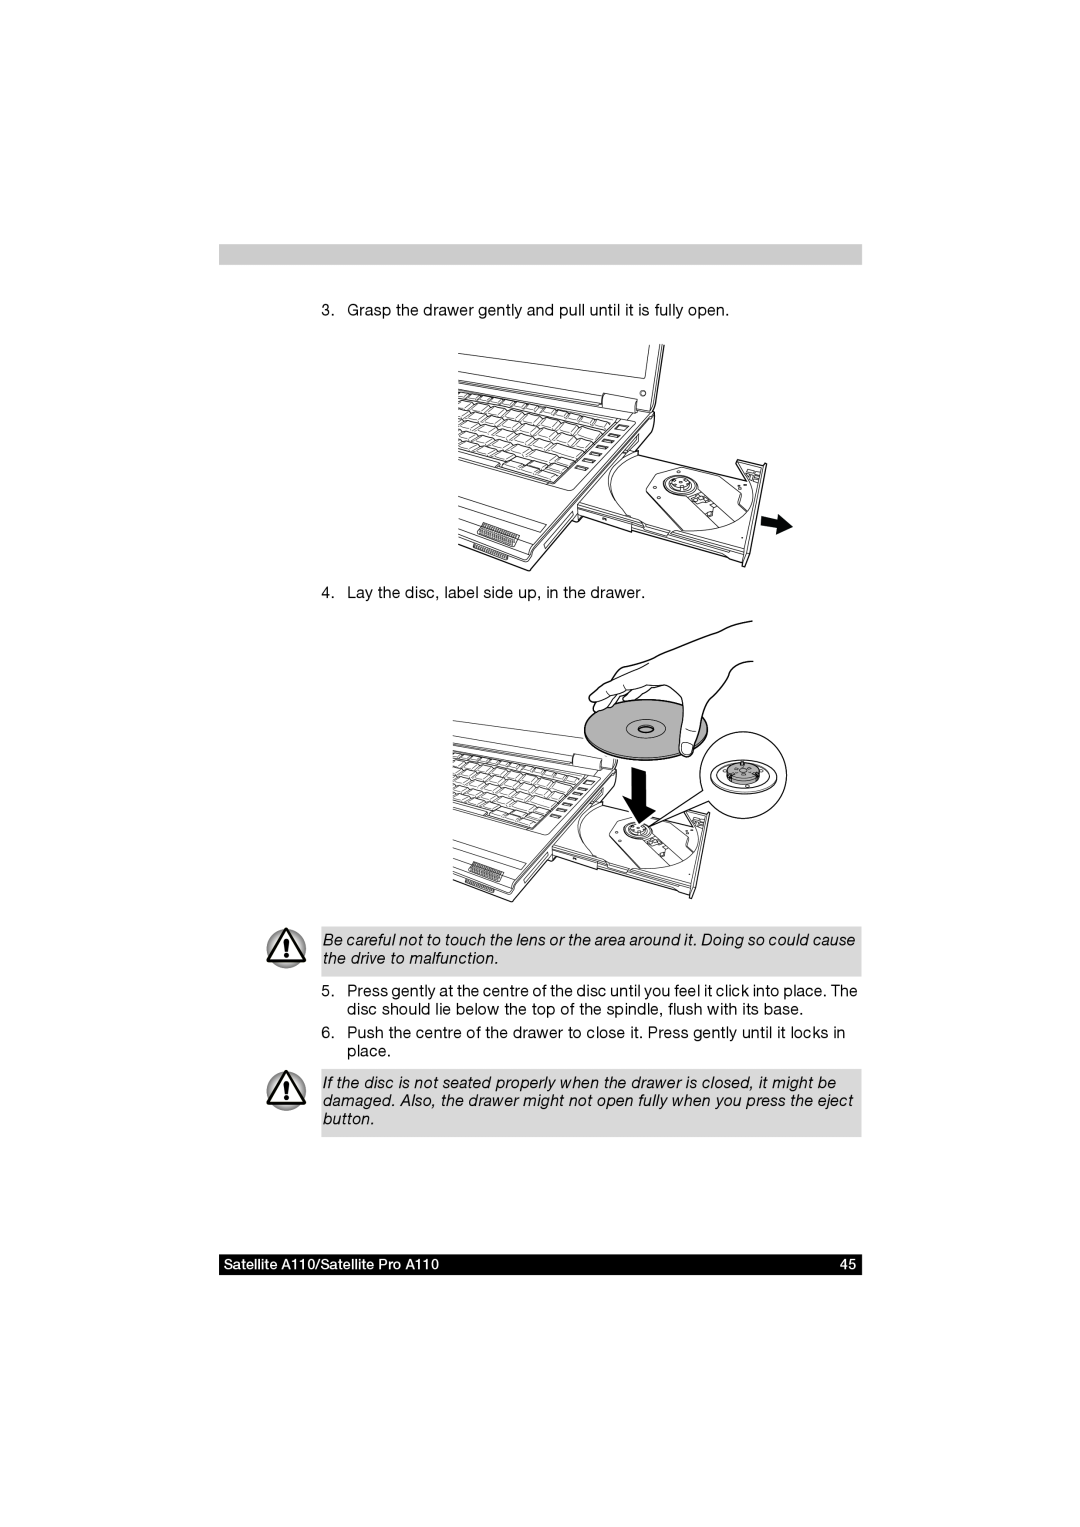 Toshiba A110 user manual Grasp the drawer gently and pull until it is fully open 